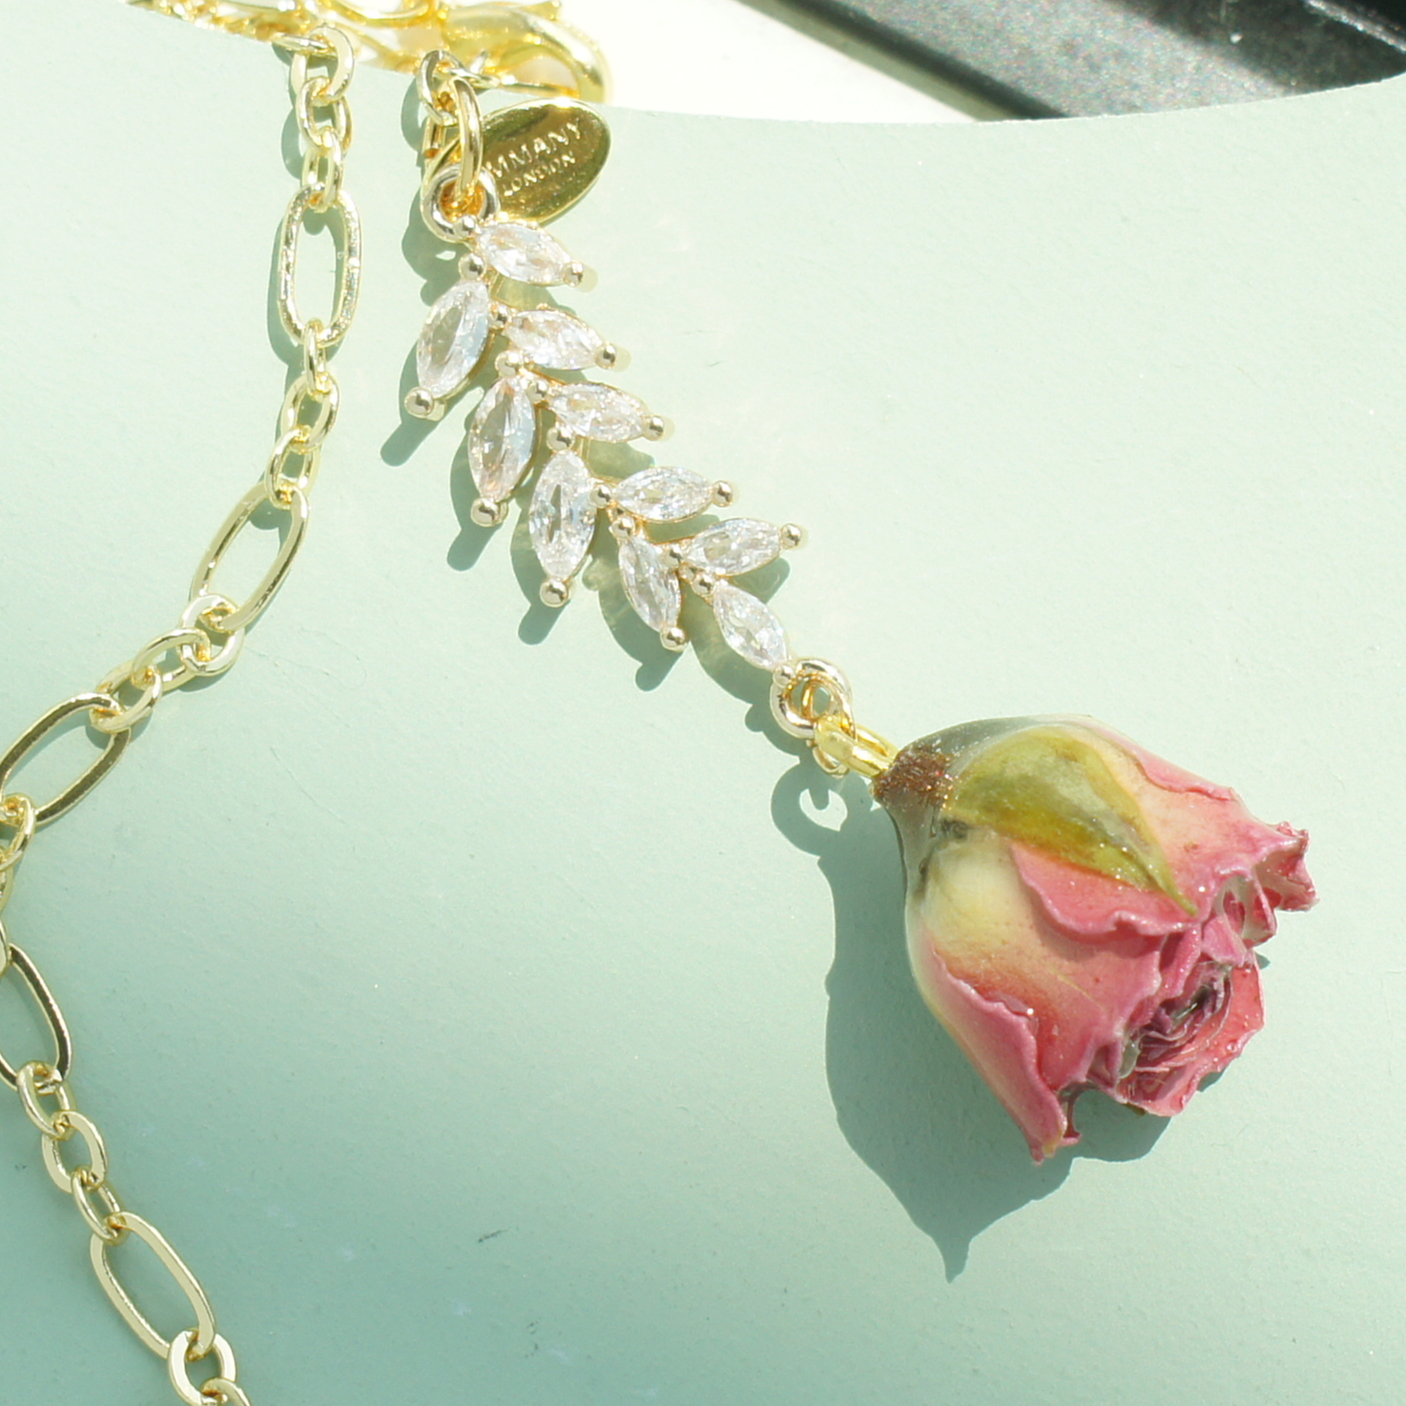 *REAL FLOWER* Rosa Brillante Rosebud Pendant Chain Necklace with Crystal Leaves